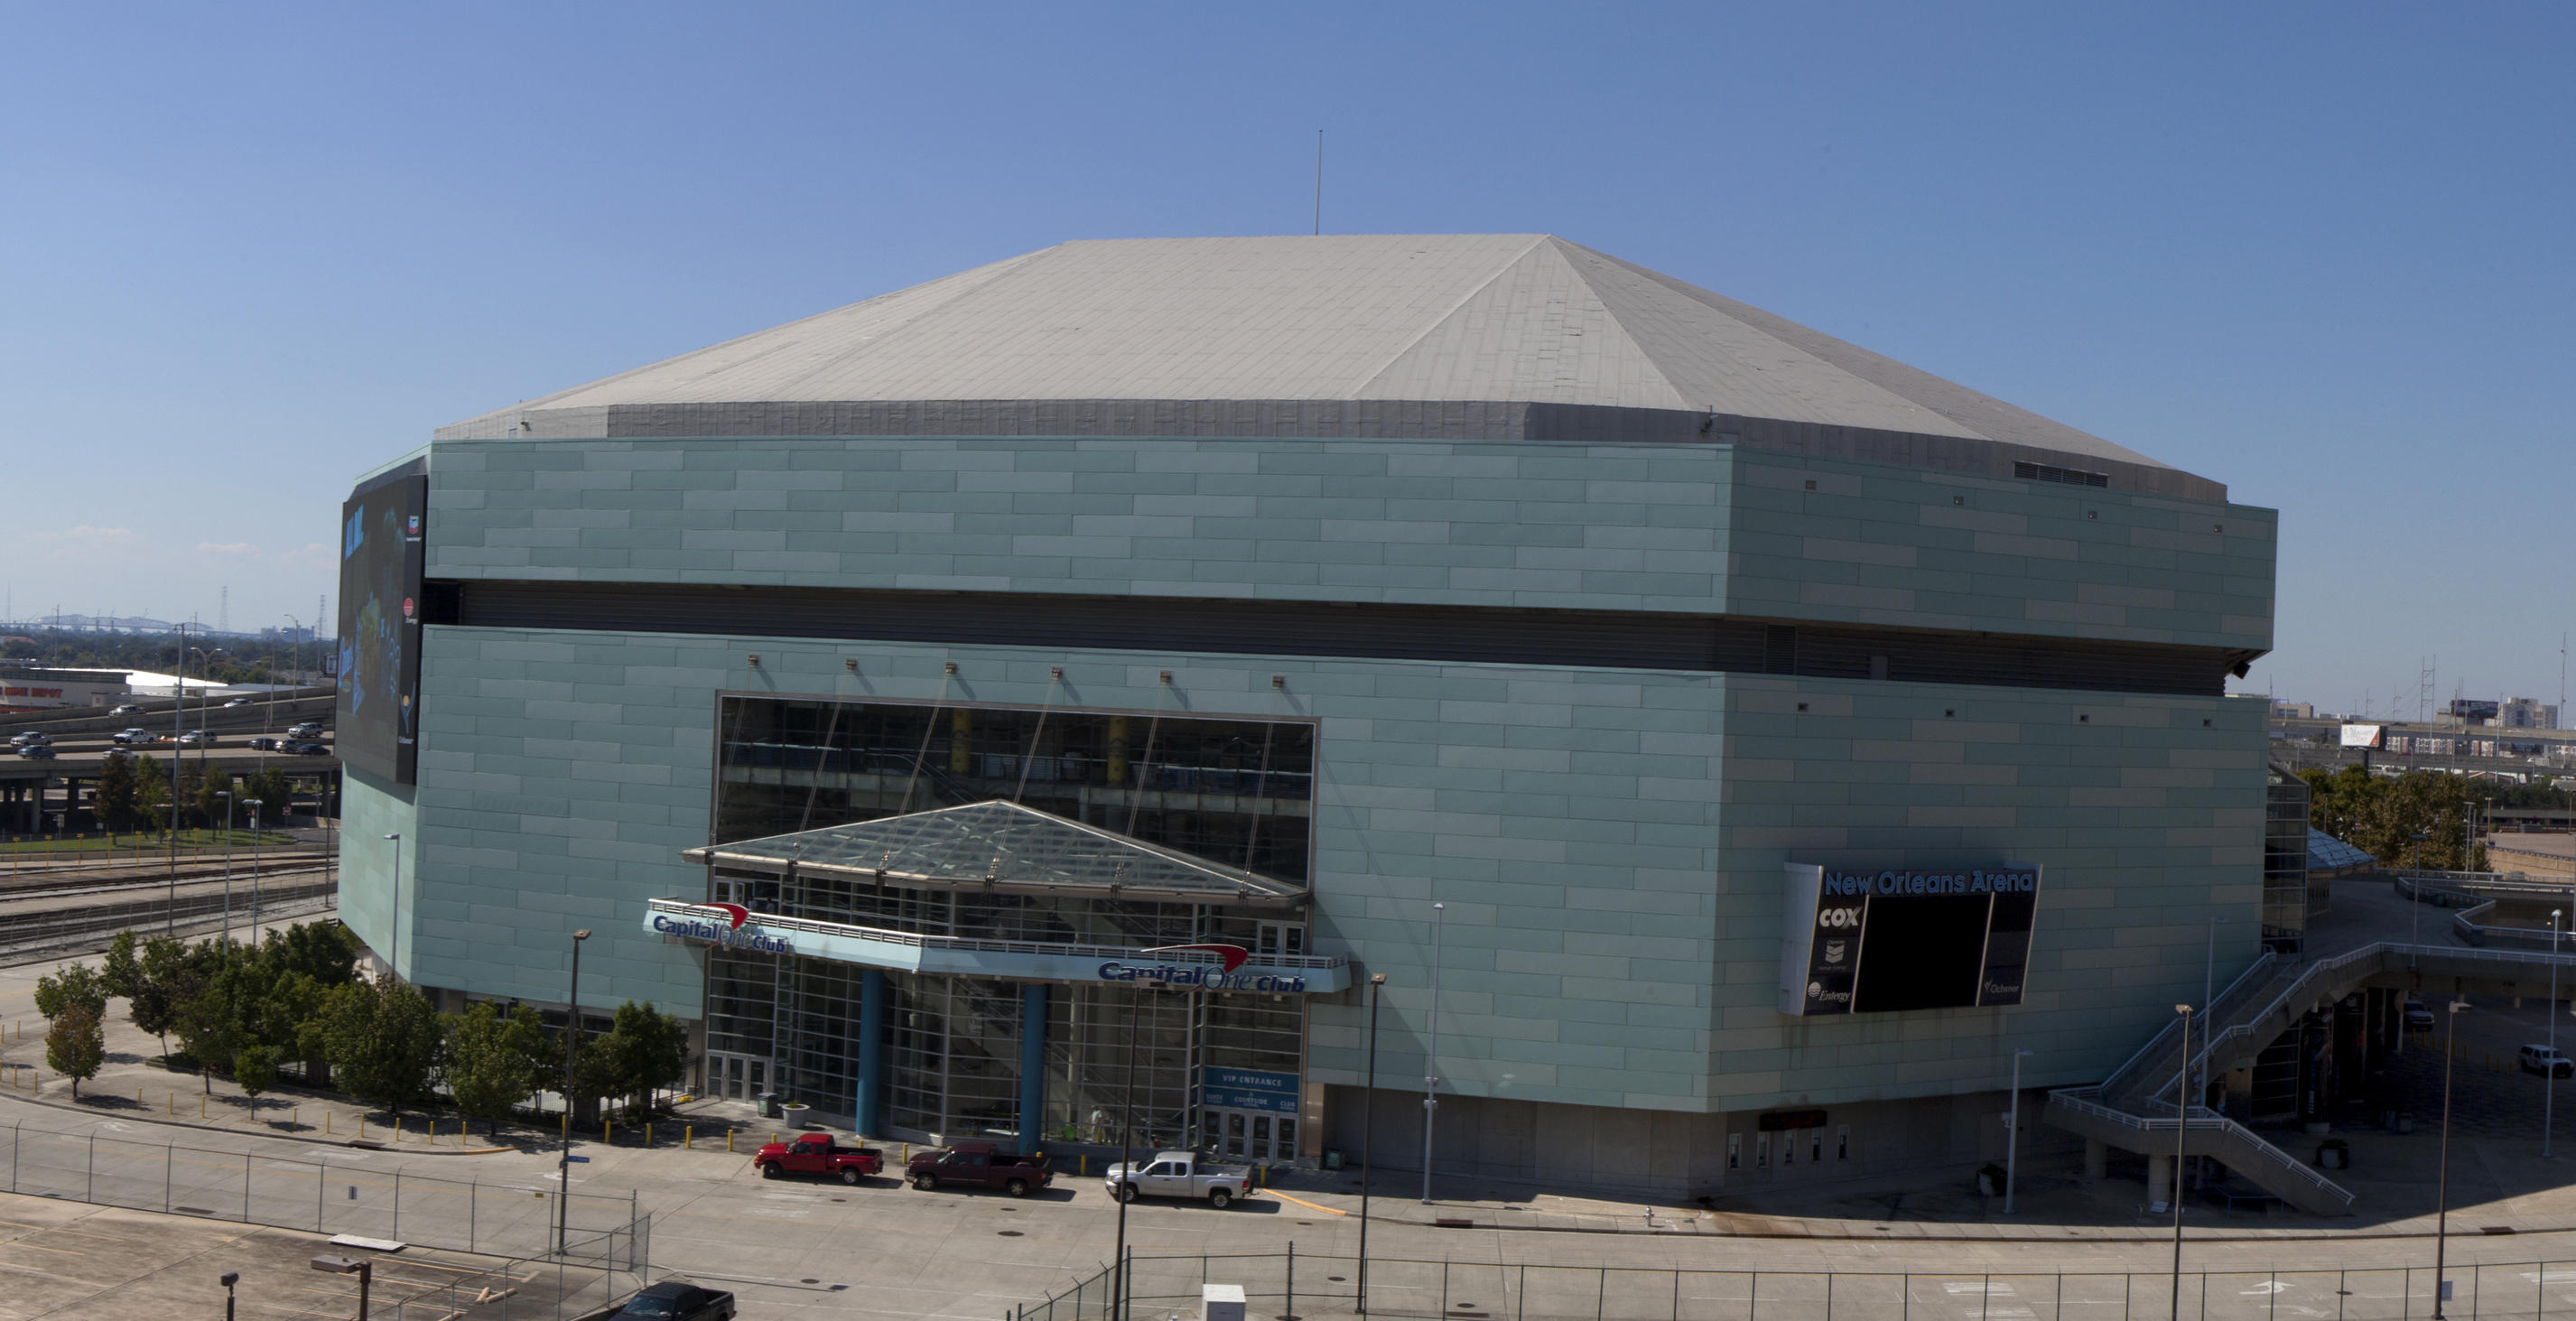 smoothie king center - home of the new orleans pelicans